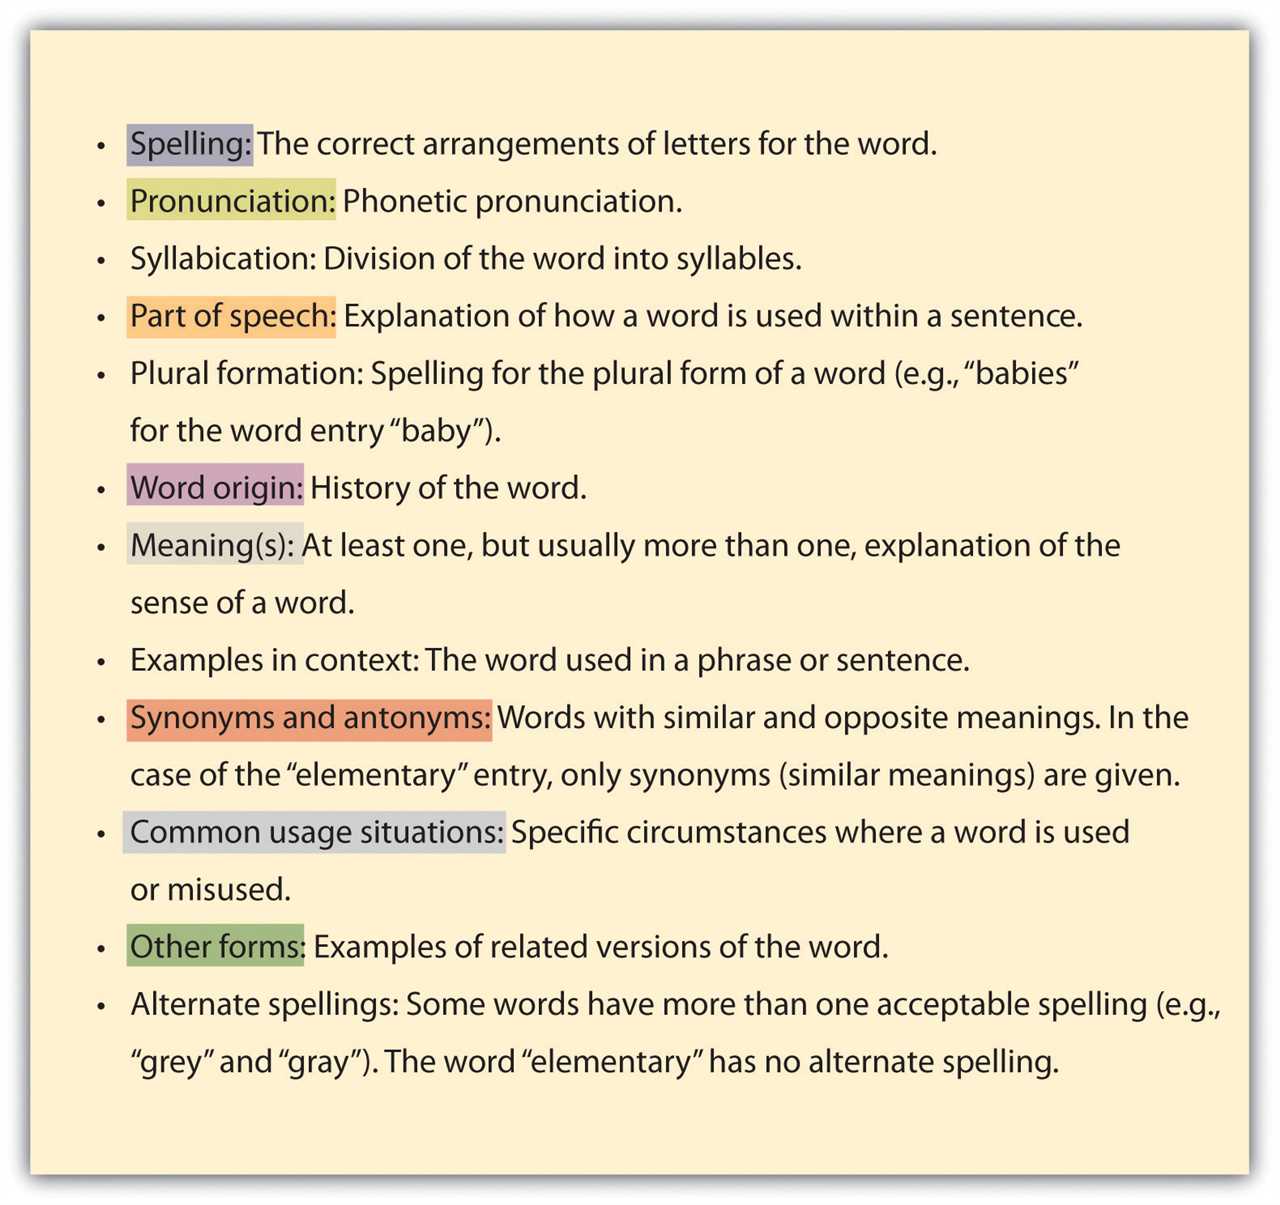 Section 1: Synonyms for Copying